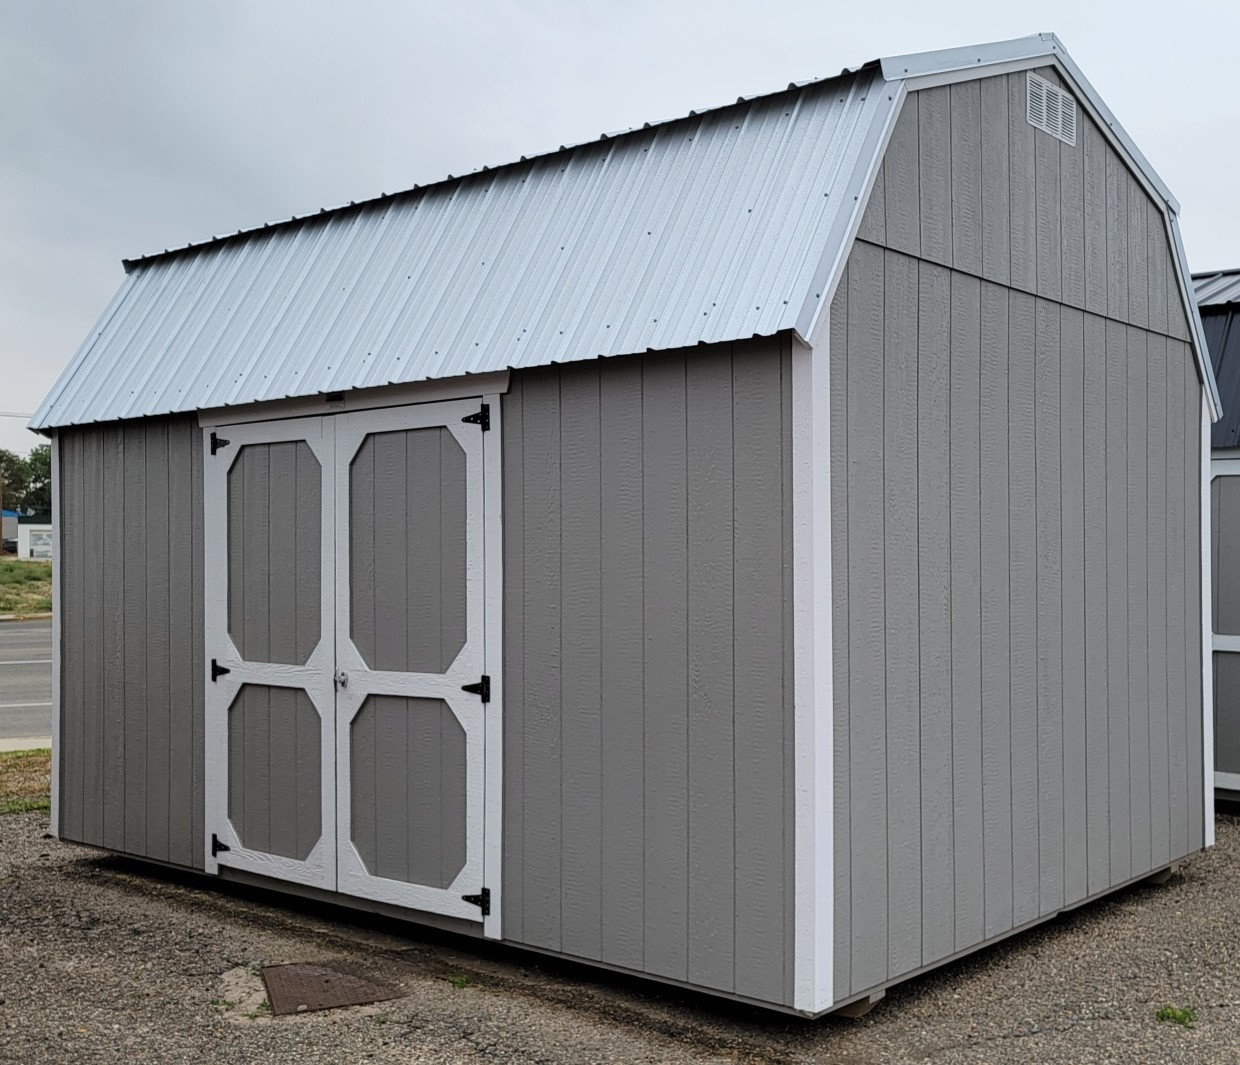 Buy Now: 10x16 Painted Lofted Barn Shed | Sheds For Sale or Custom order Sheds